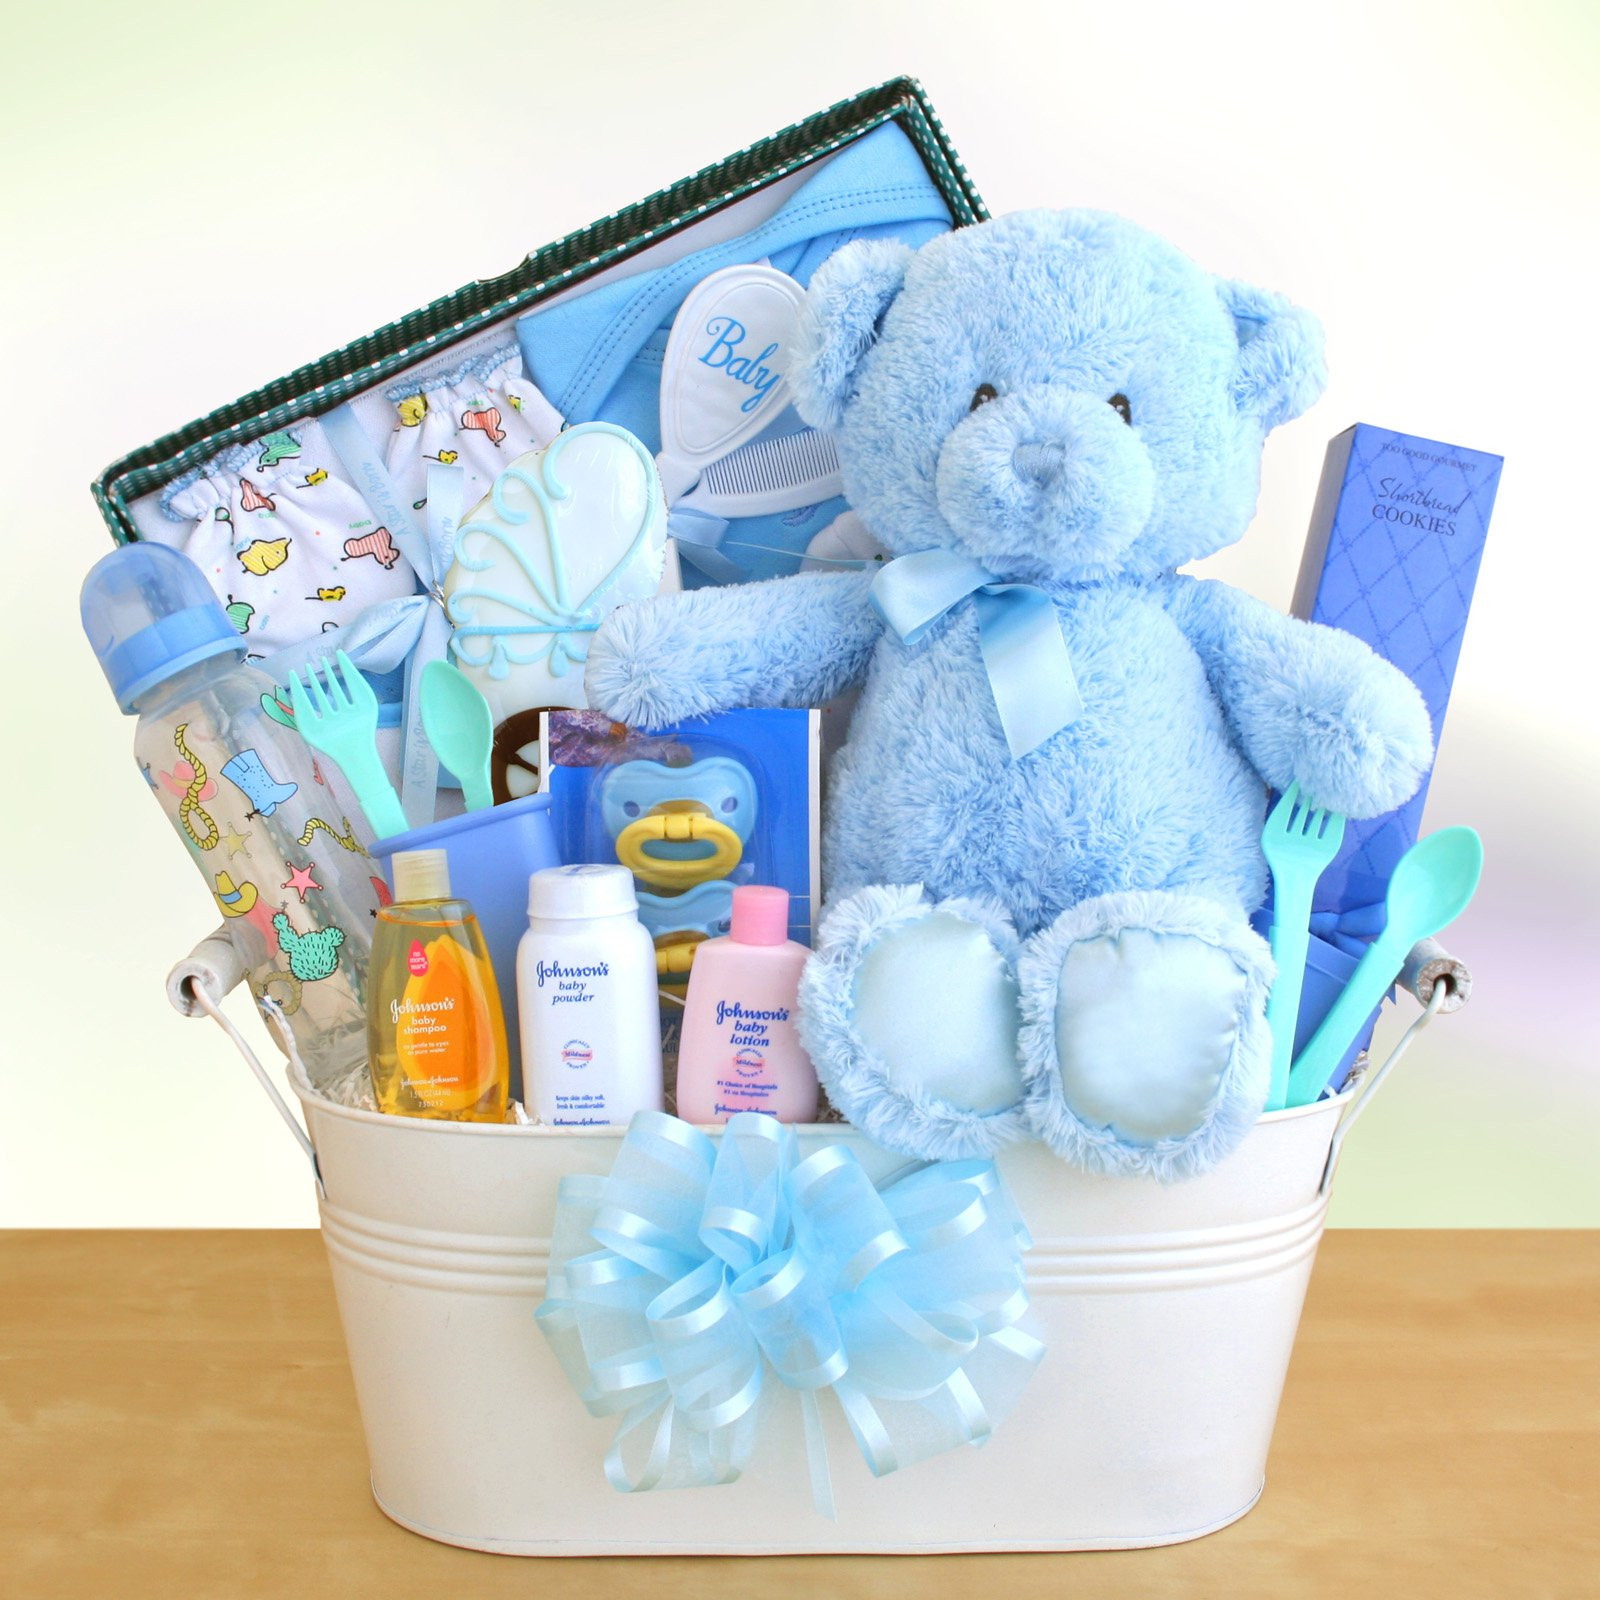 Baby Gift Ideas For Boys
 New Arrival Baby Boy Gift Basket Gift Baskets by